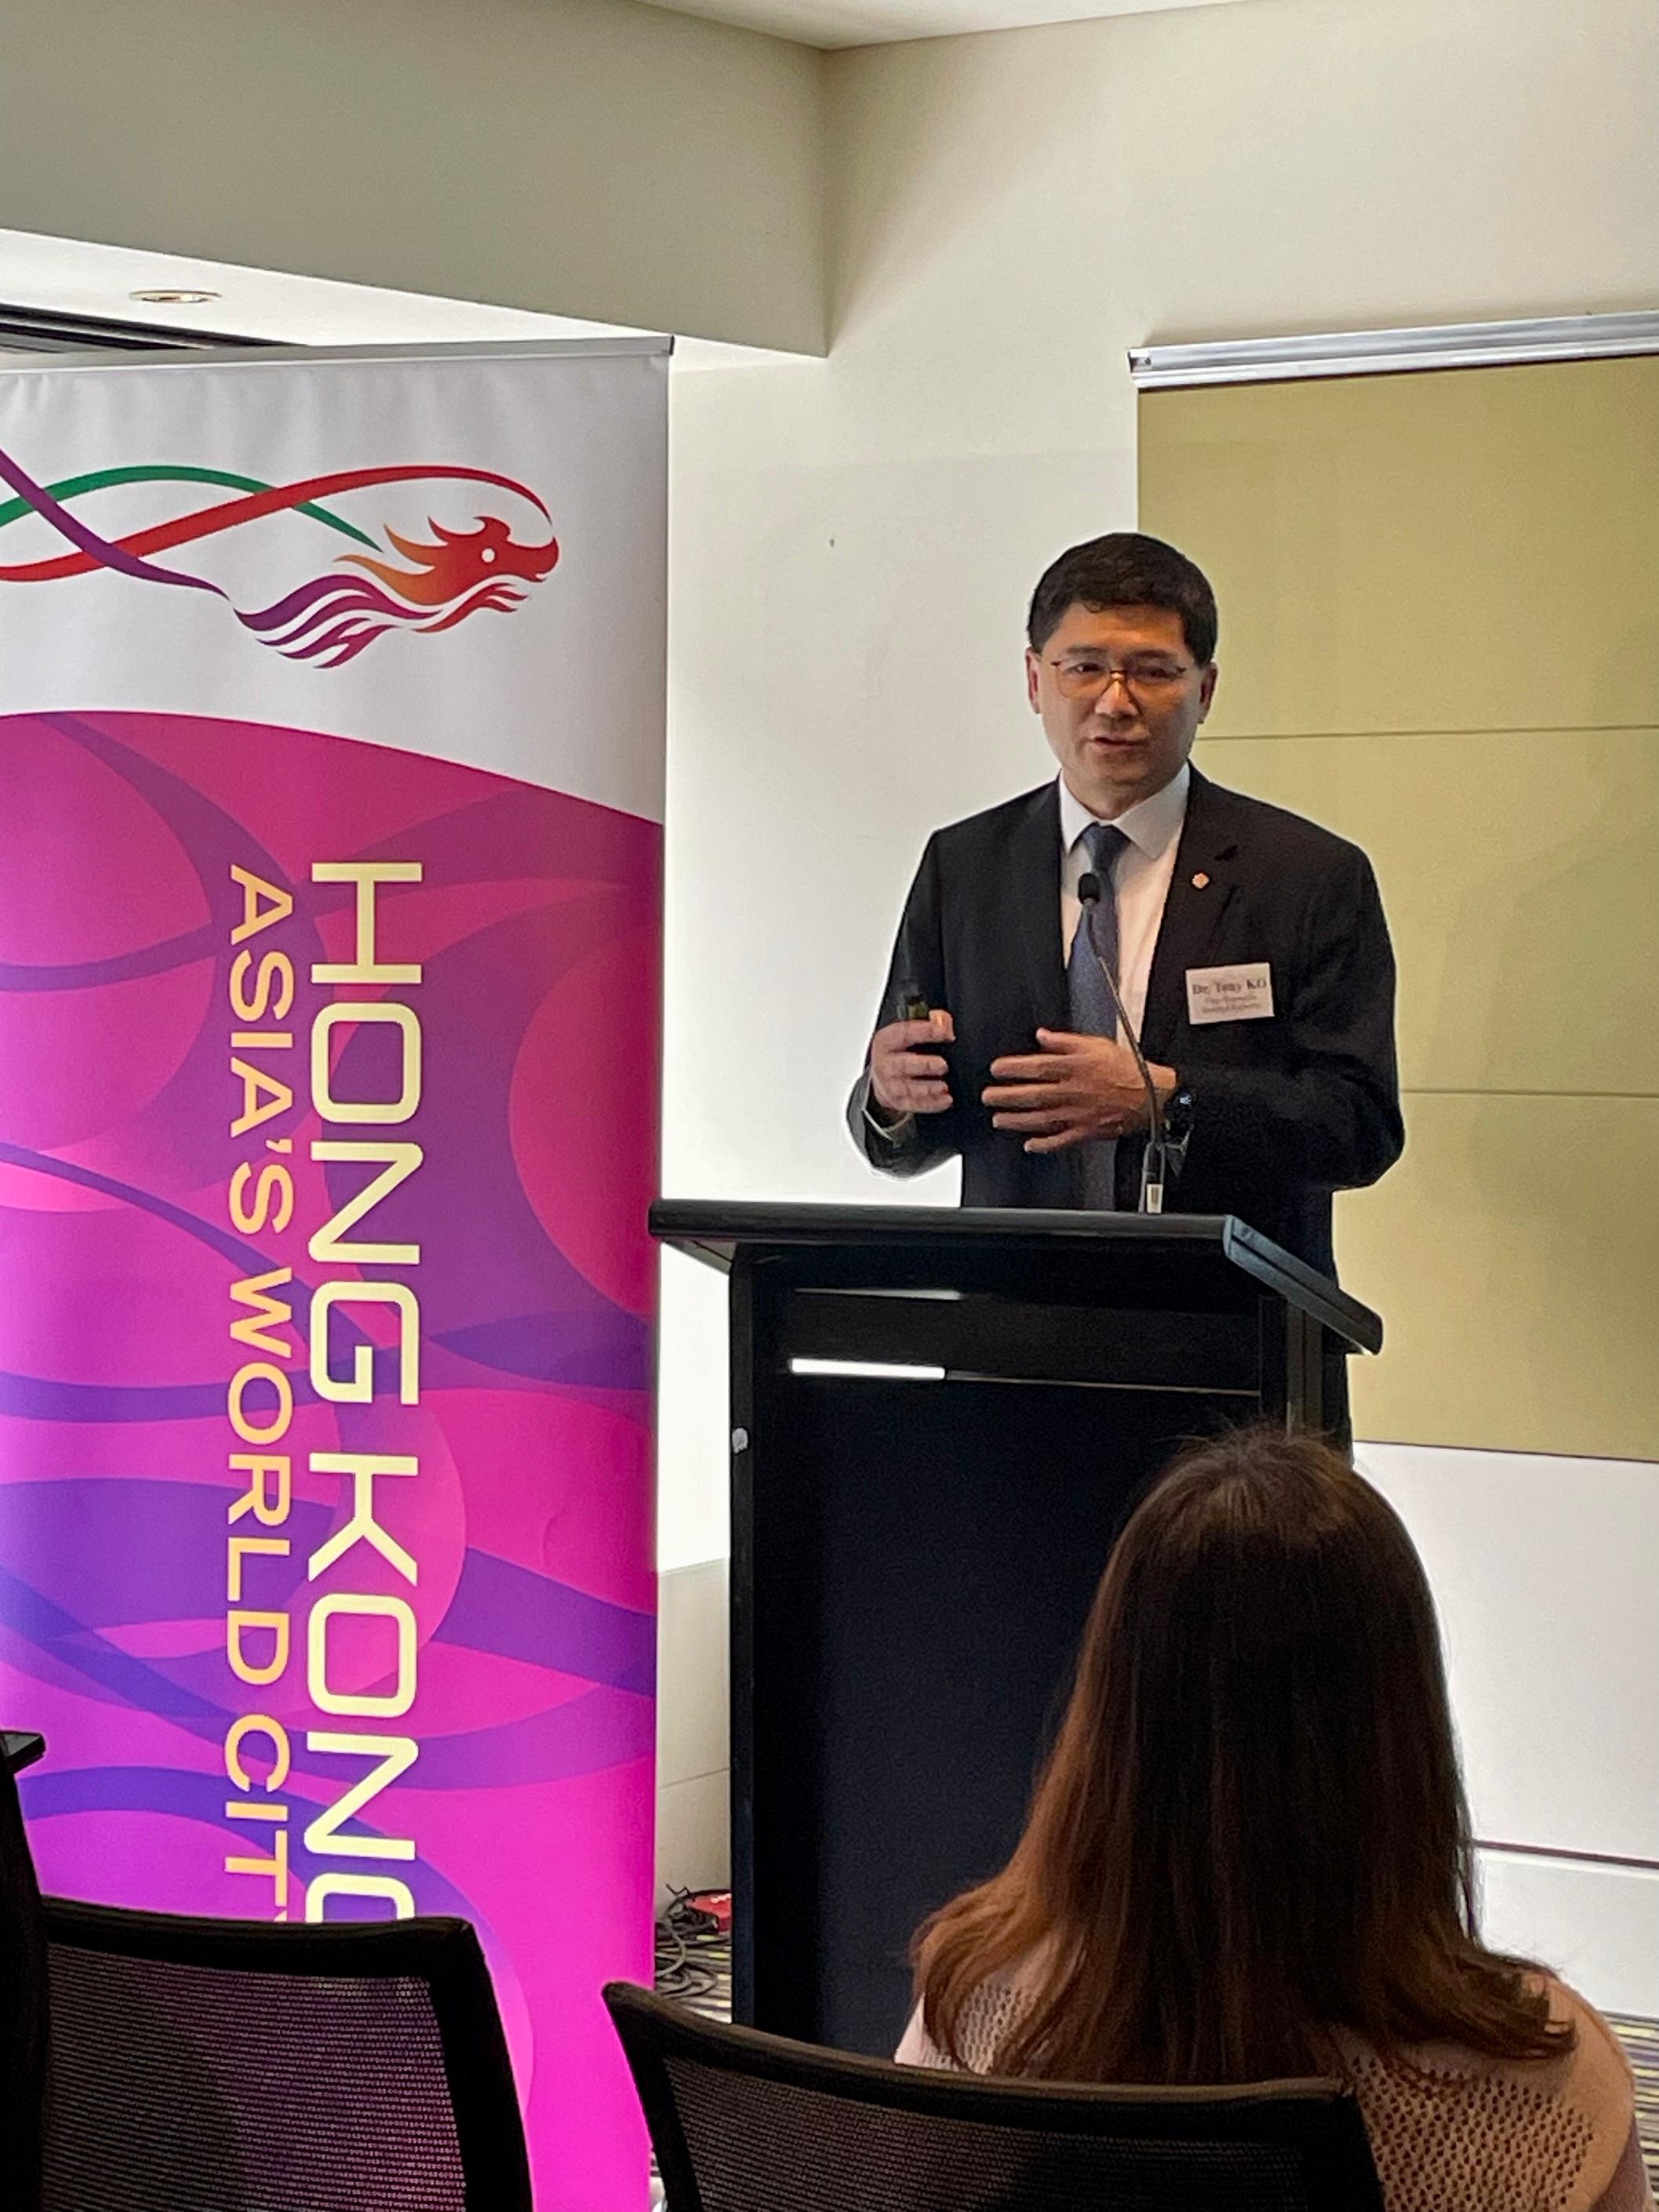 The Chief Executive of the Hospital Authority, Dr Tony Ko, promotes the latest pathway and registration arrangement for non-locally trained doctors to practise in Hong Kong at the Recruitment Day held in Sydney, Australia today (June 3).